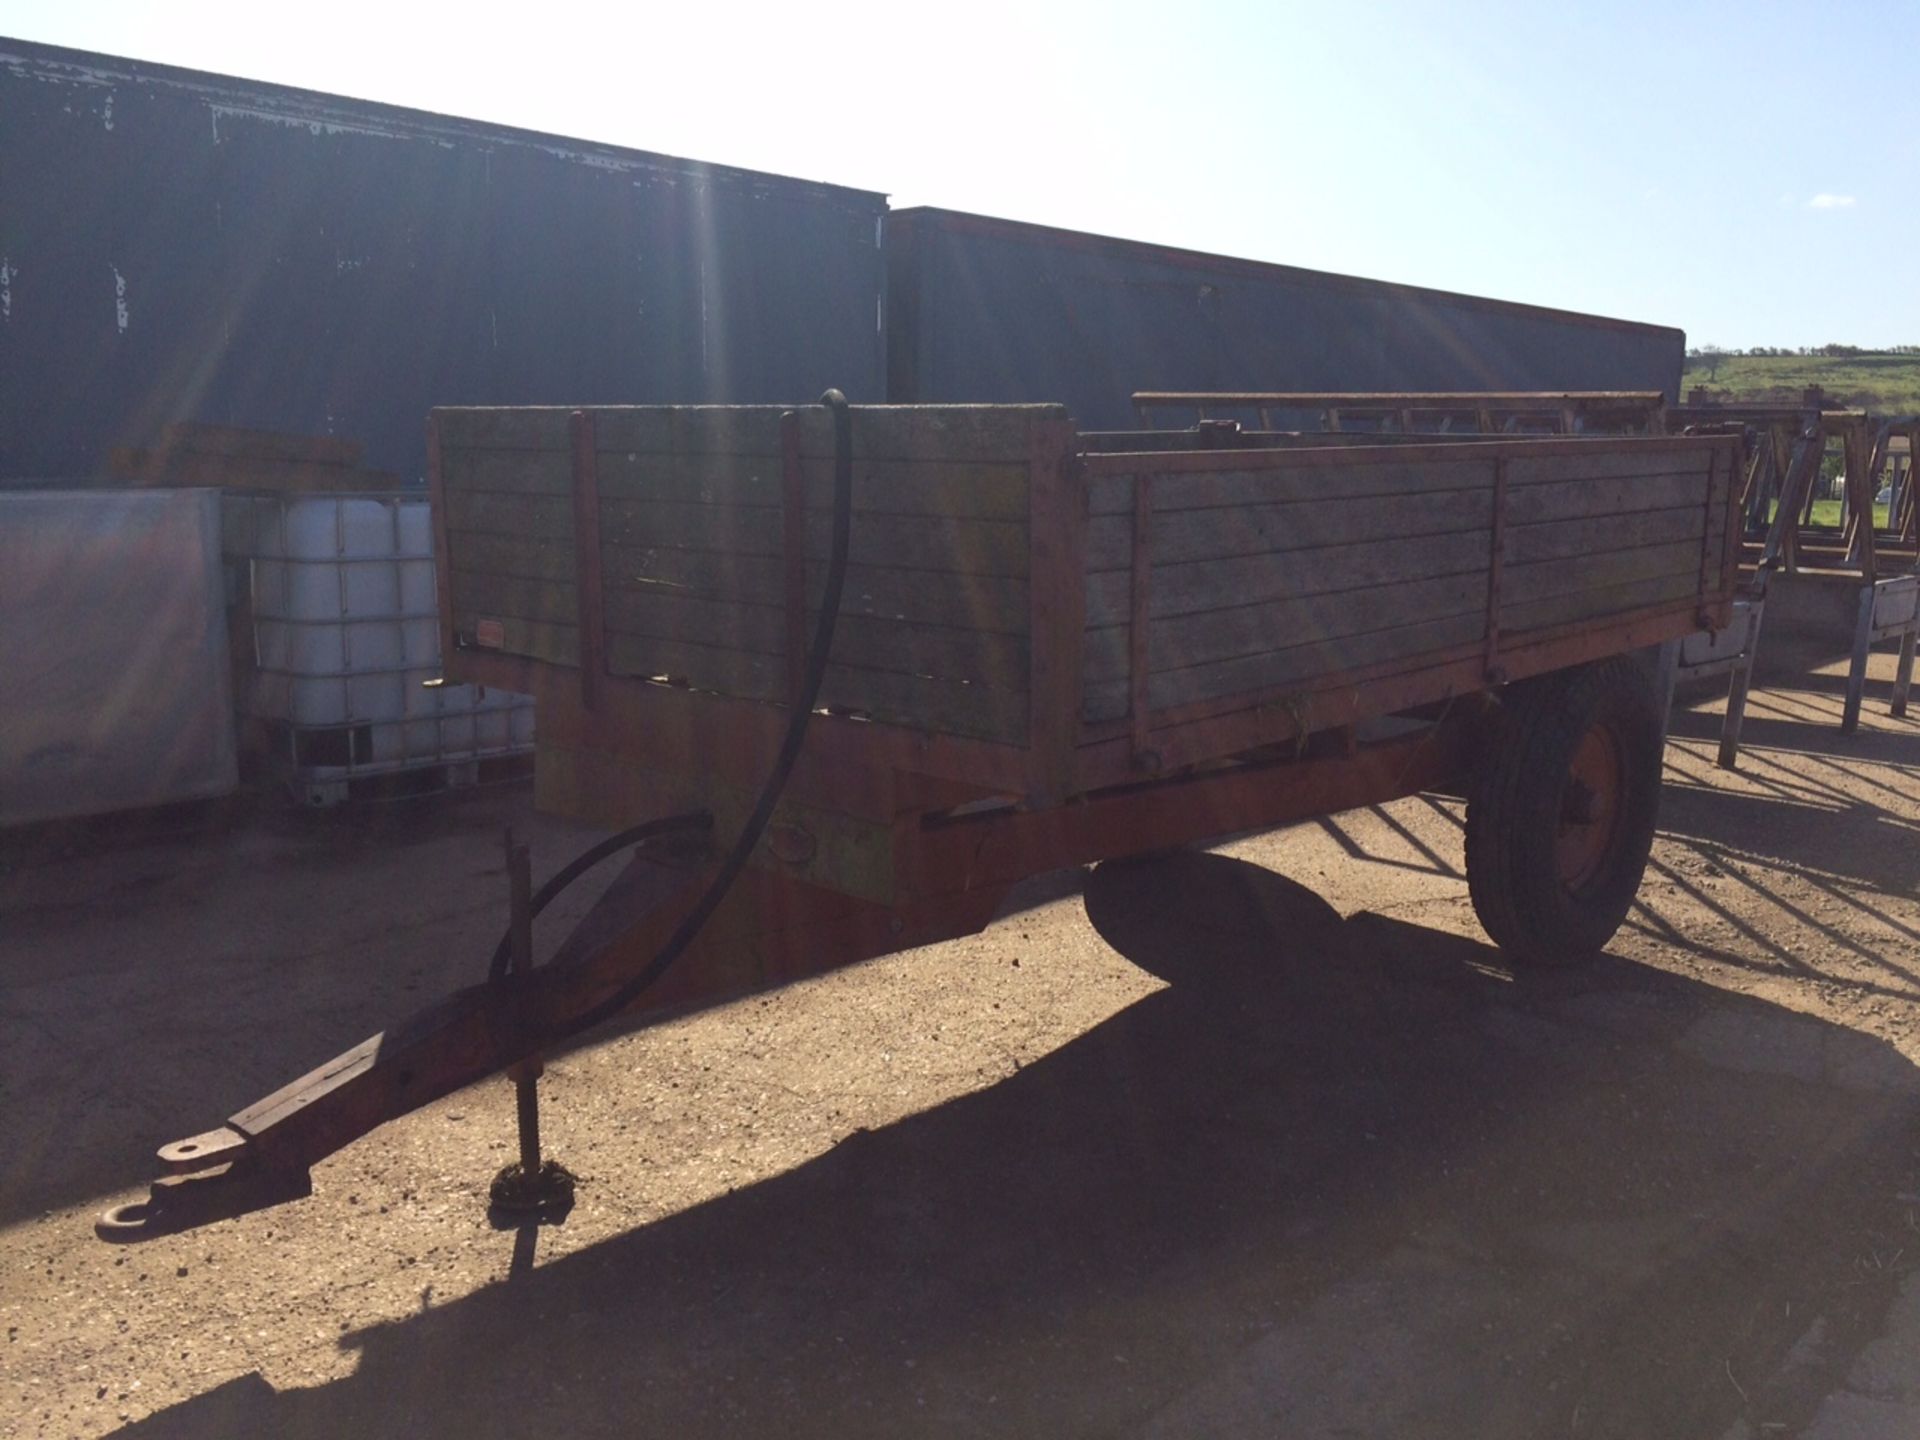 Two Wheel 3 Tonne Pettit Trailer Location: Grantham, Lincolnshire - Image 2 of 3